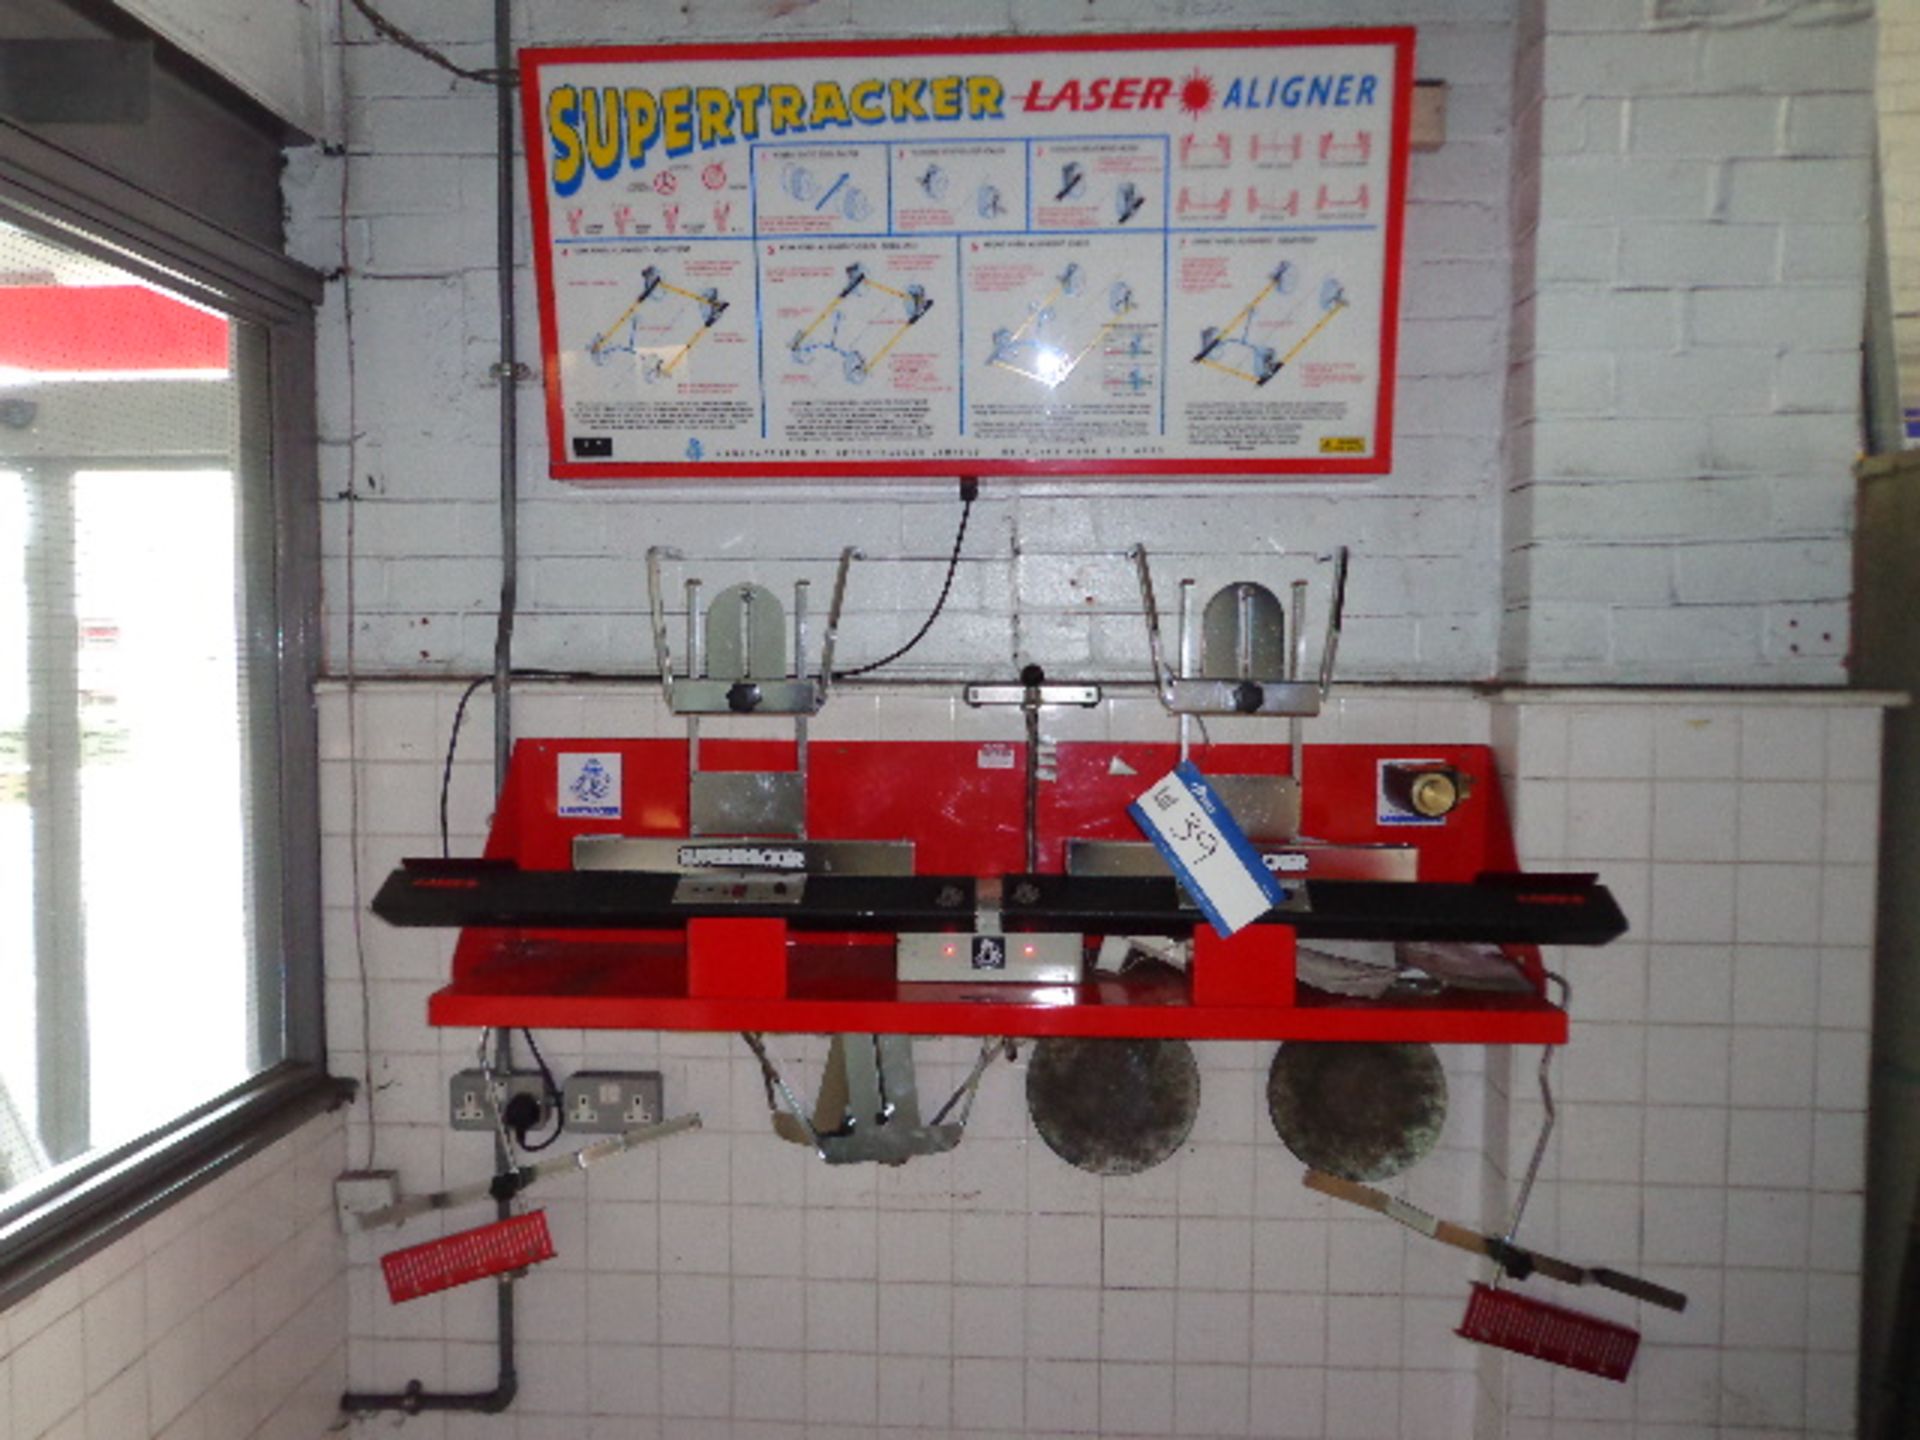 Laser Supertracker Wheel Alignment System with Wall Shelf and Sign